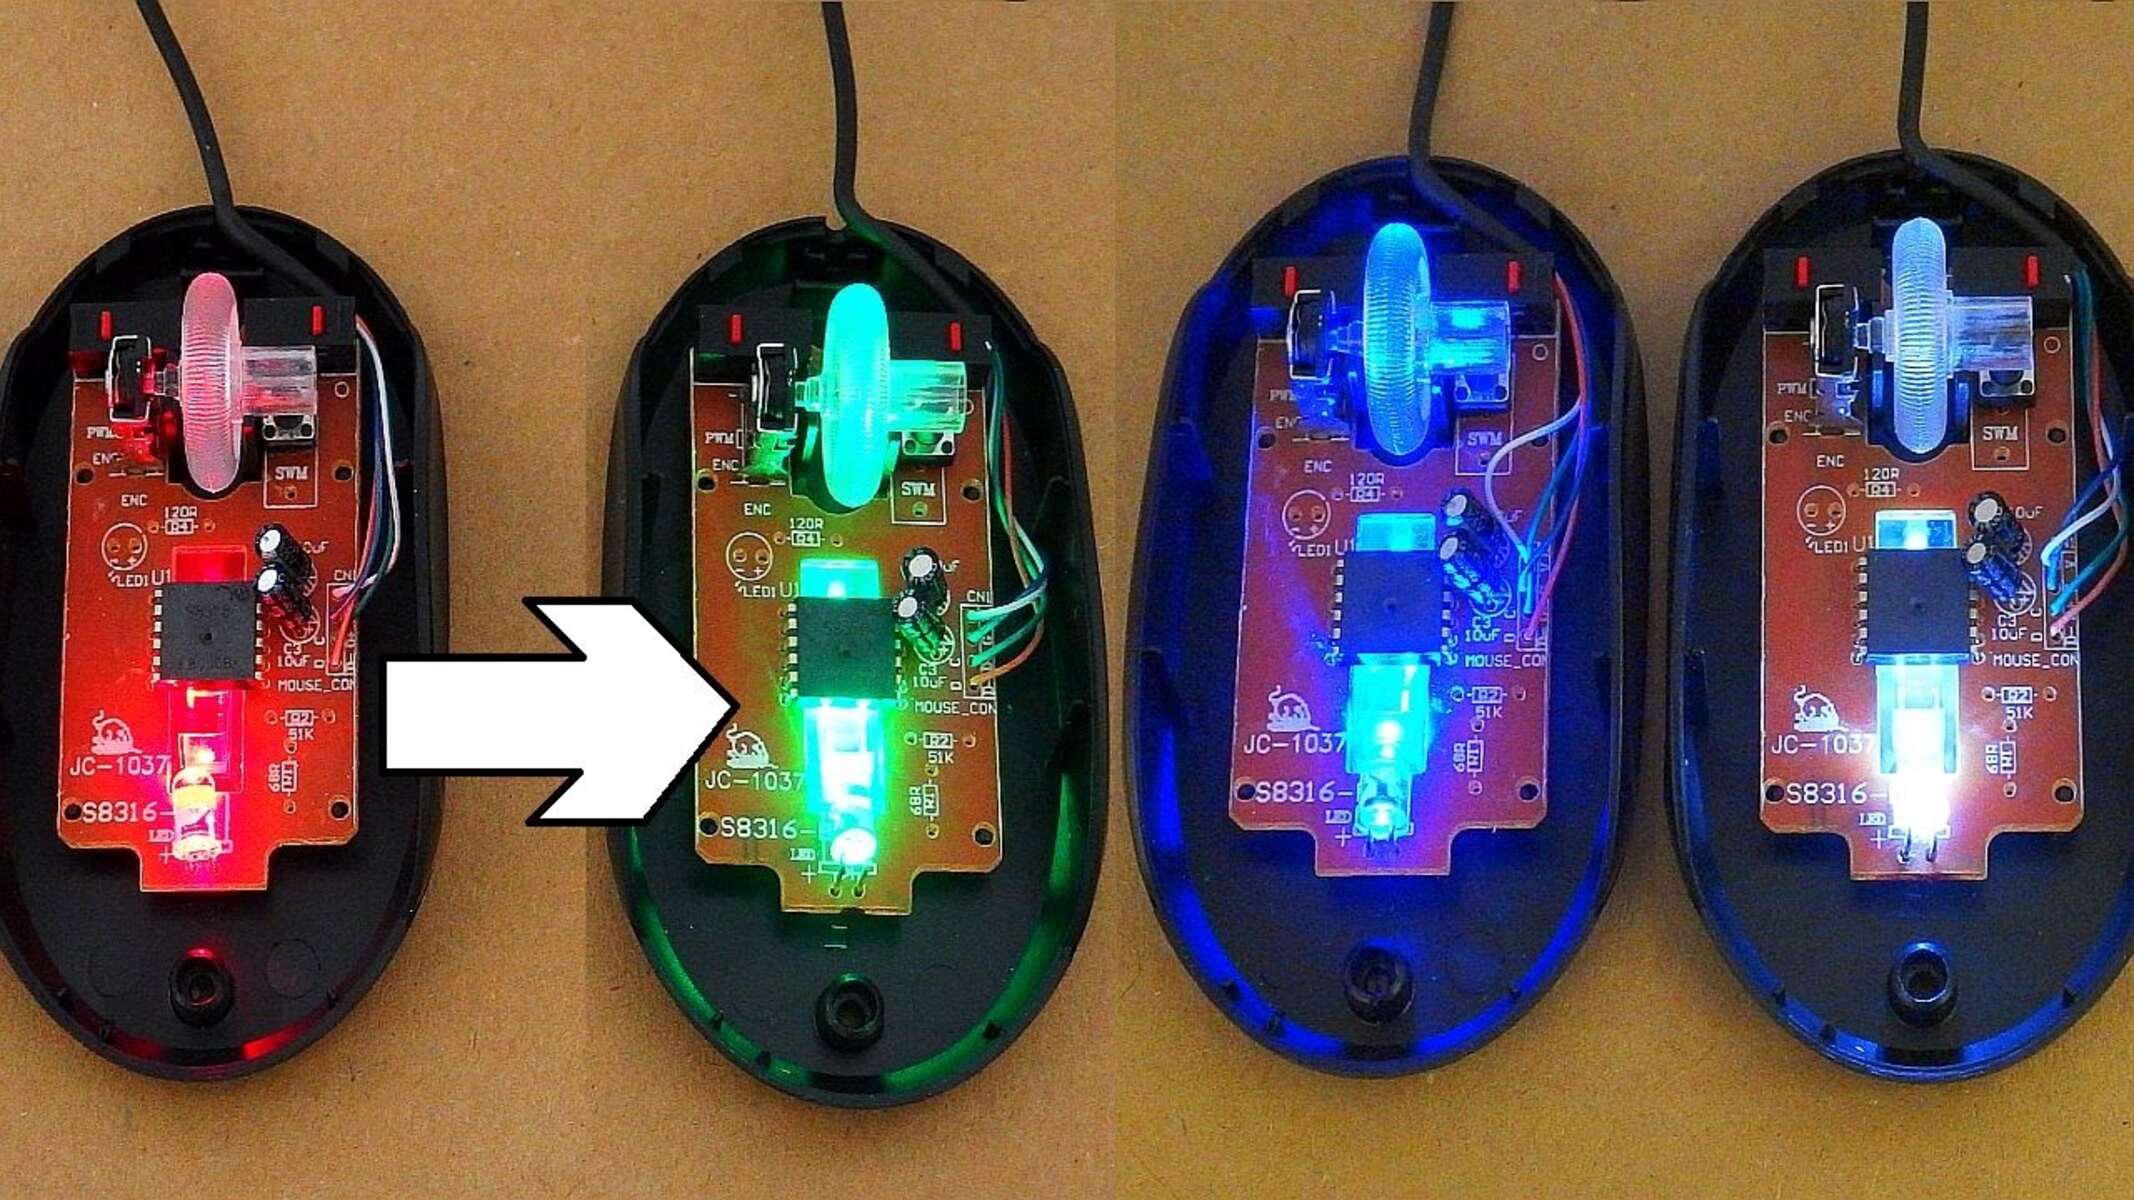 How To Add And Change Color On M102 Gaming Mouse?